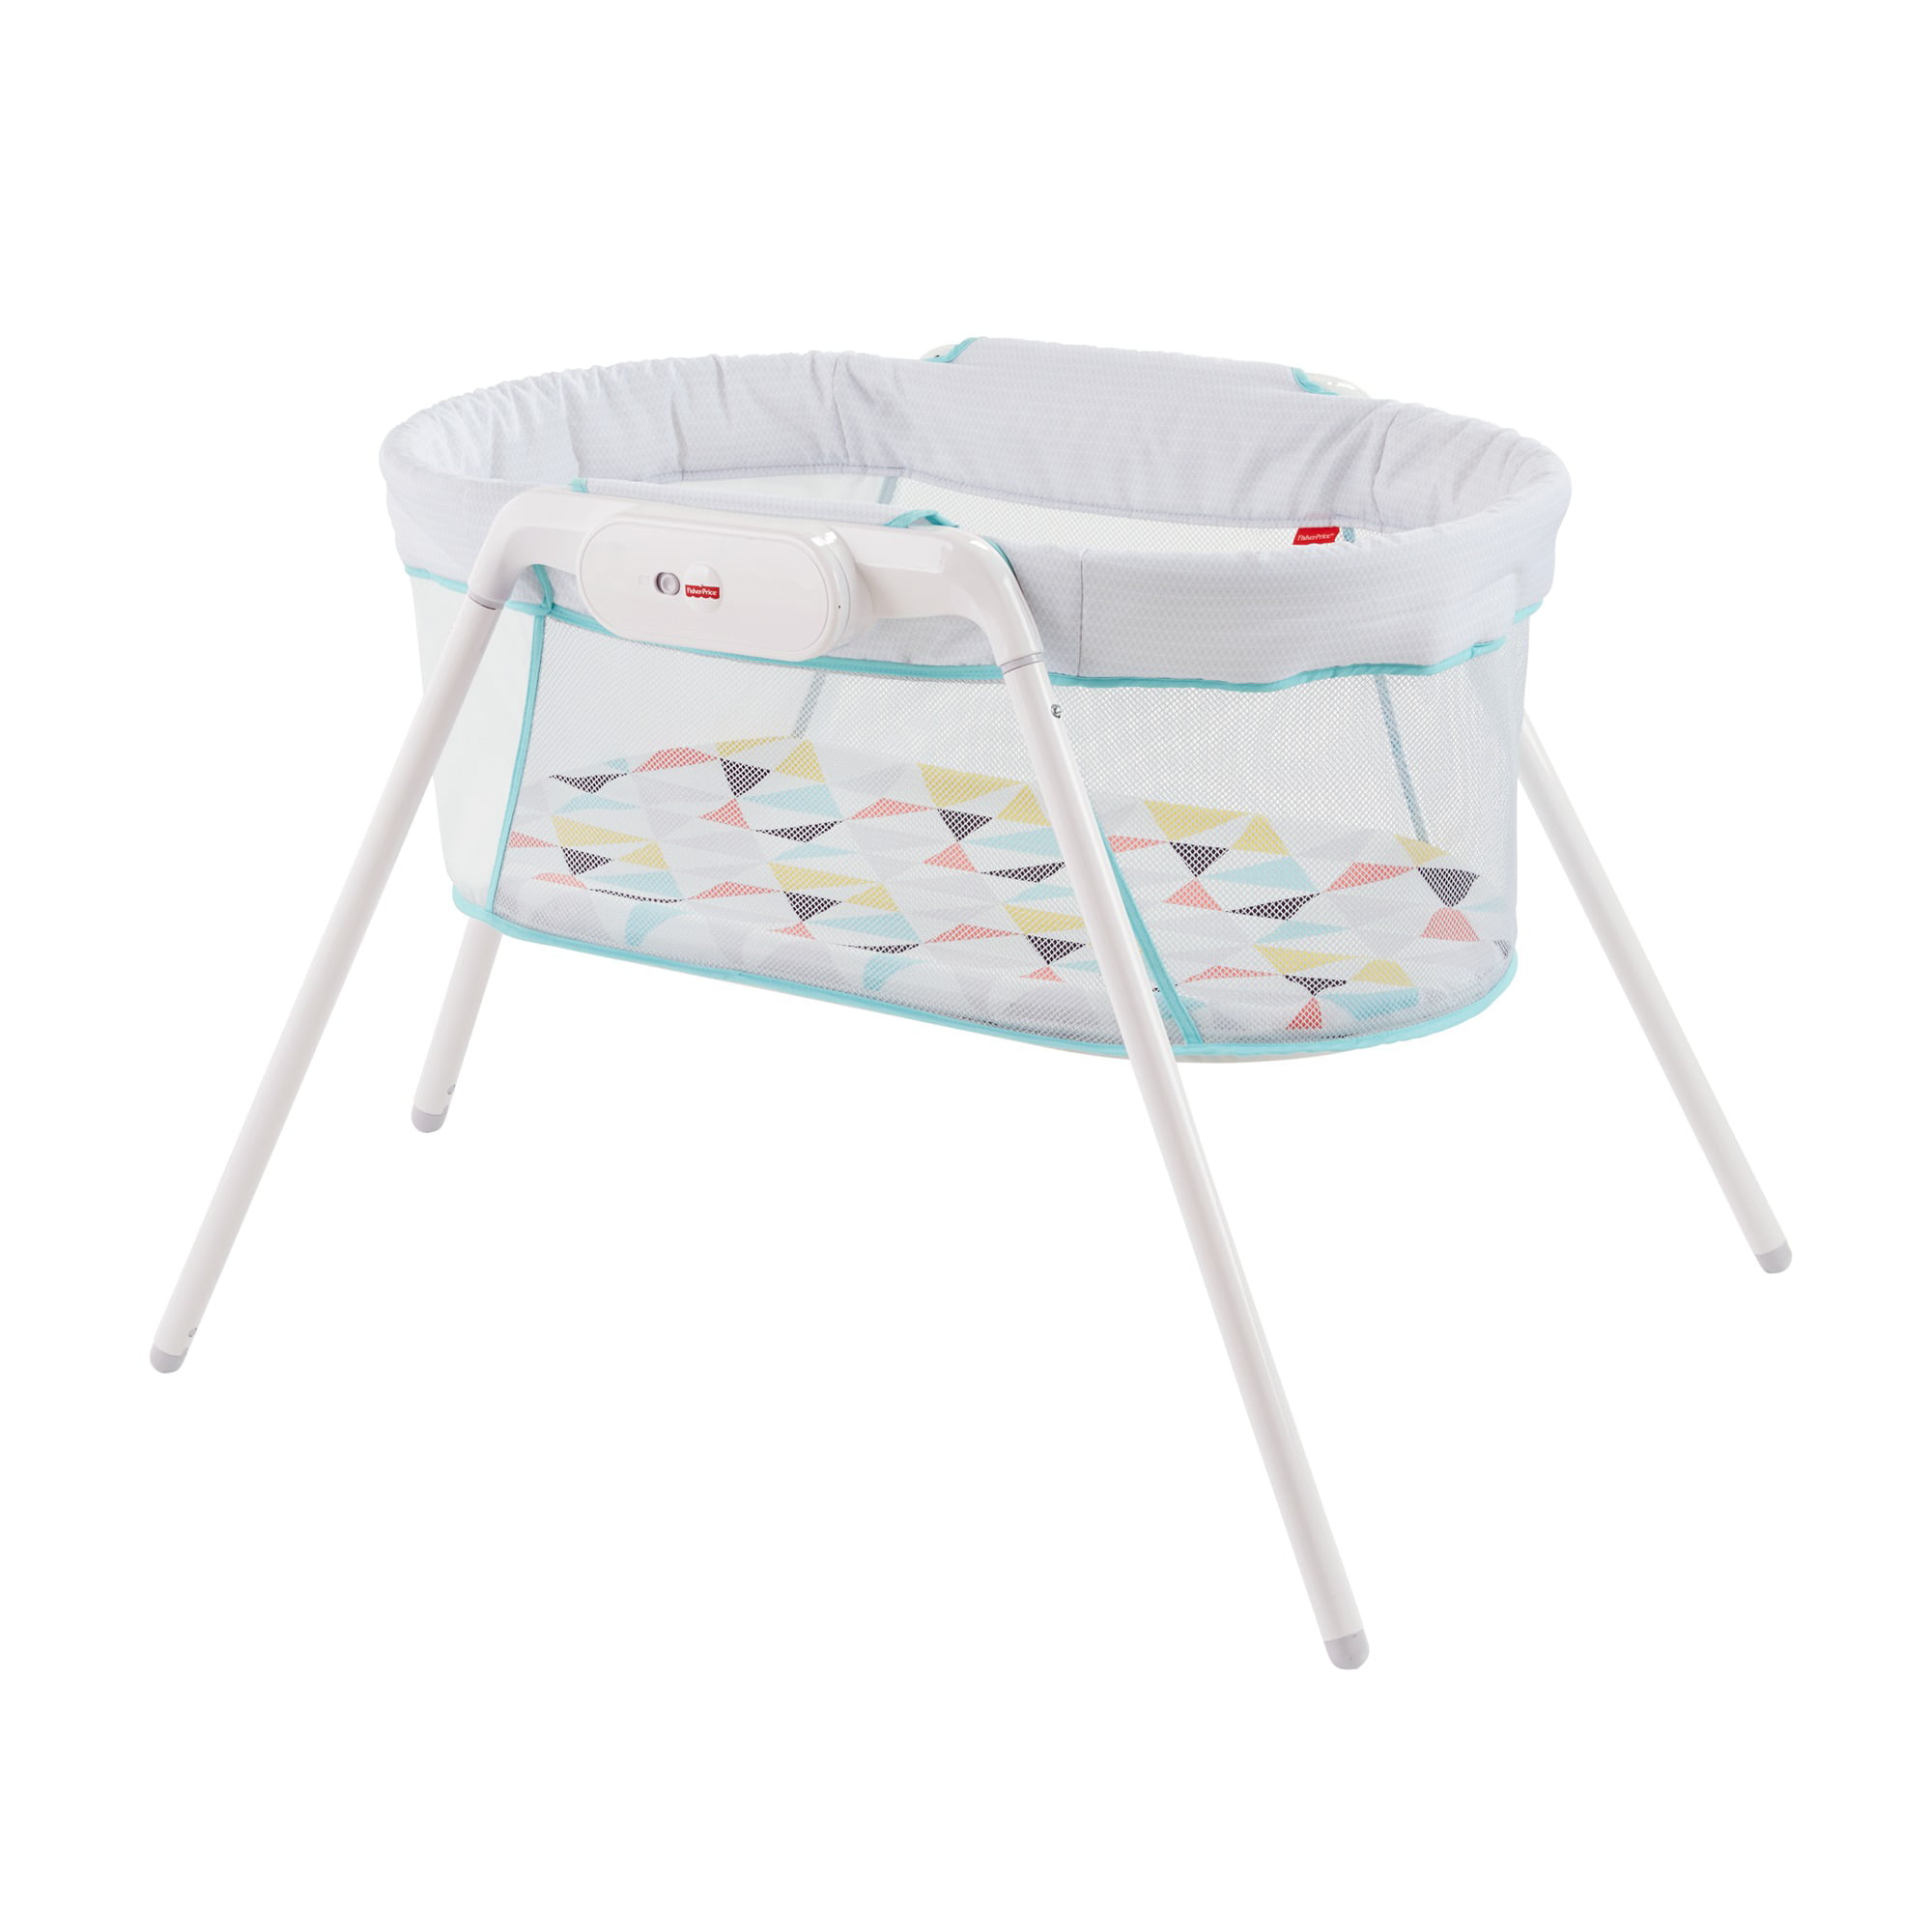 fisher price soothing motions bassinet walmart